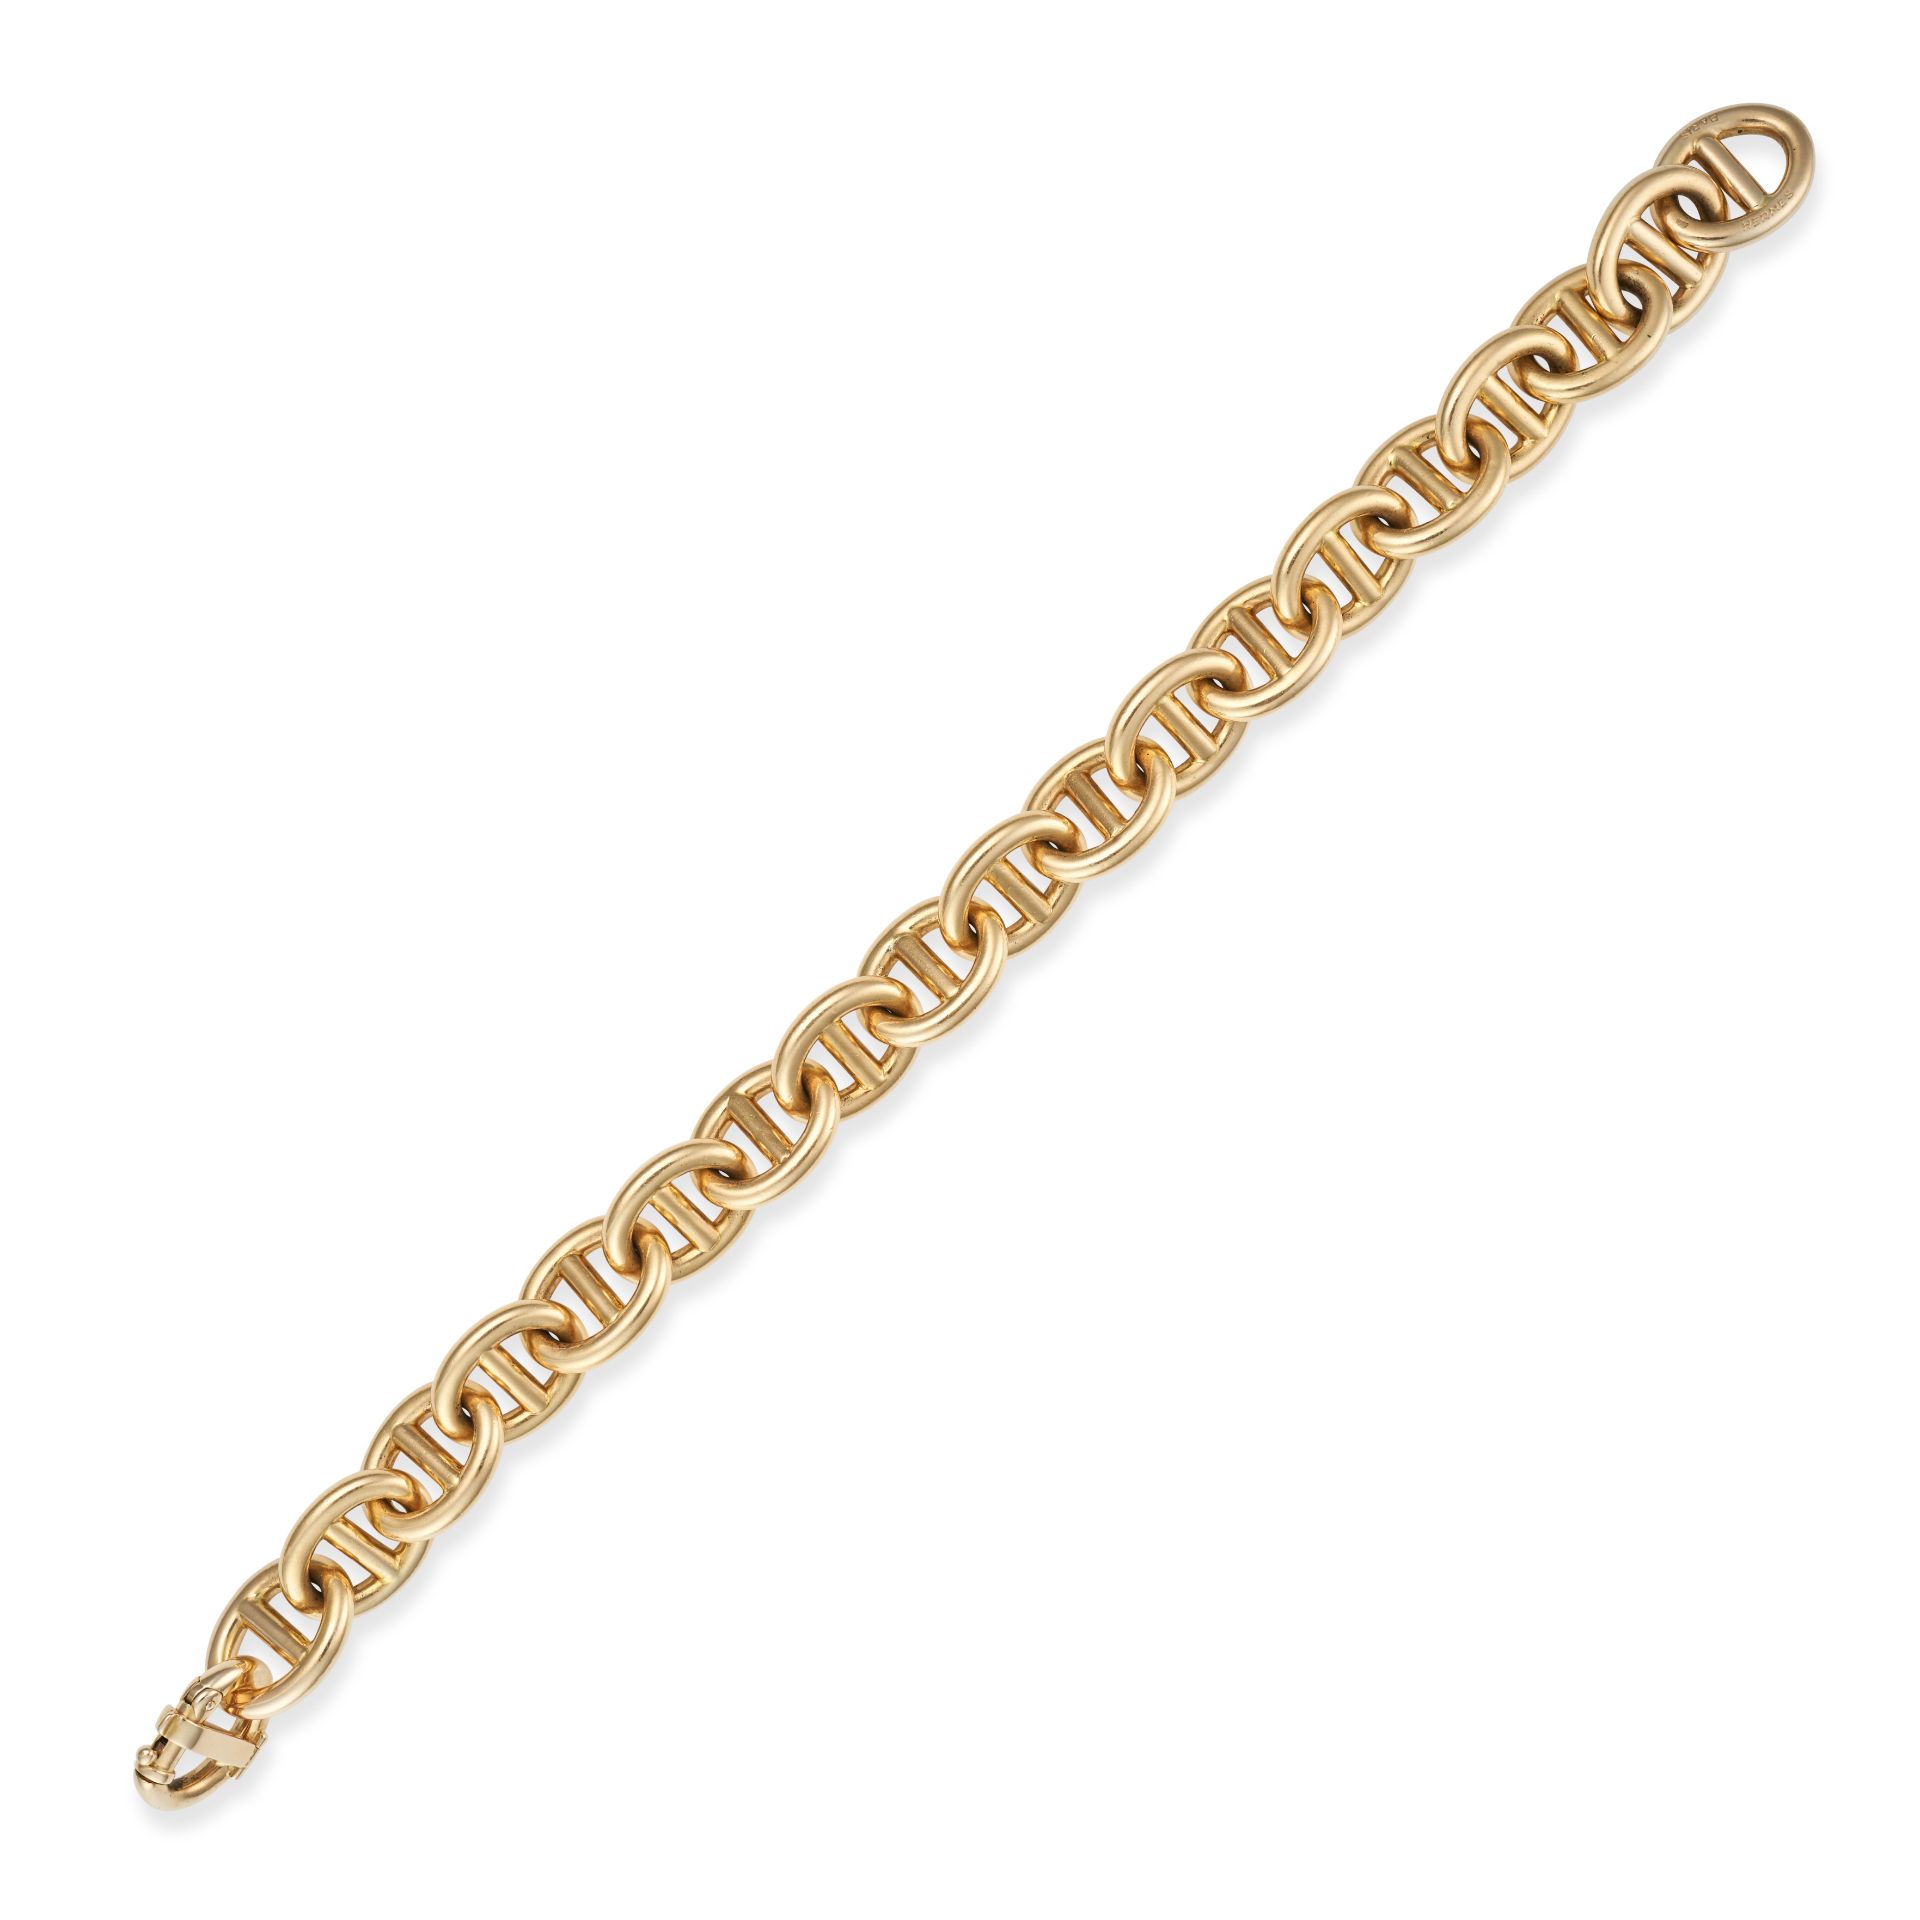 HERMES, A MARINER LINK BRACELET in 18ct yellow gold, comprising a row of mariner links, signed He...